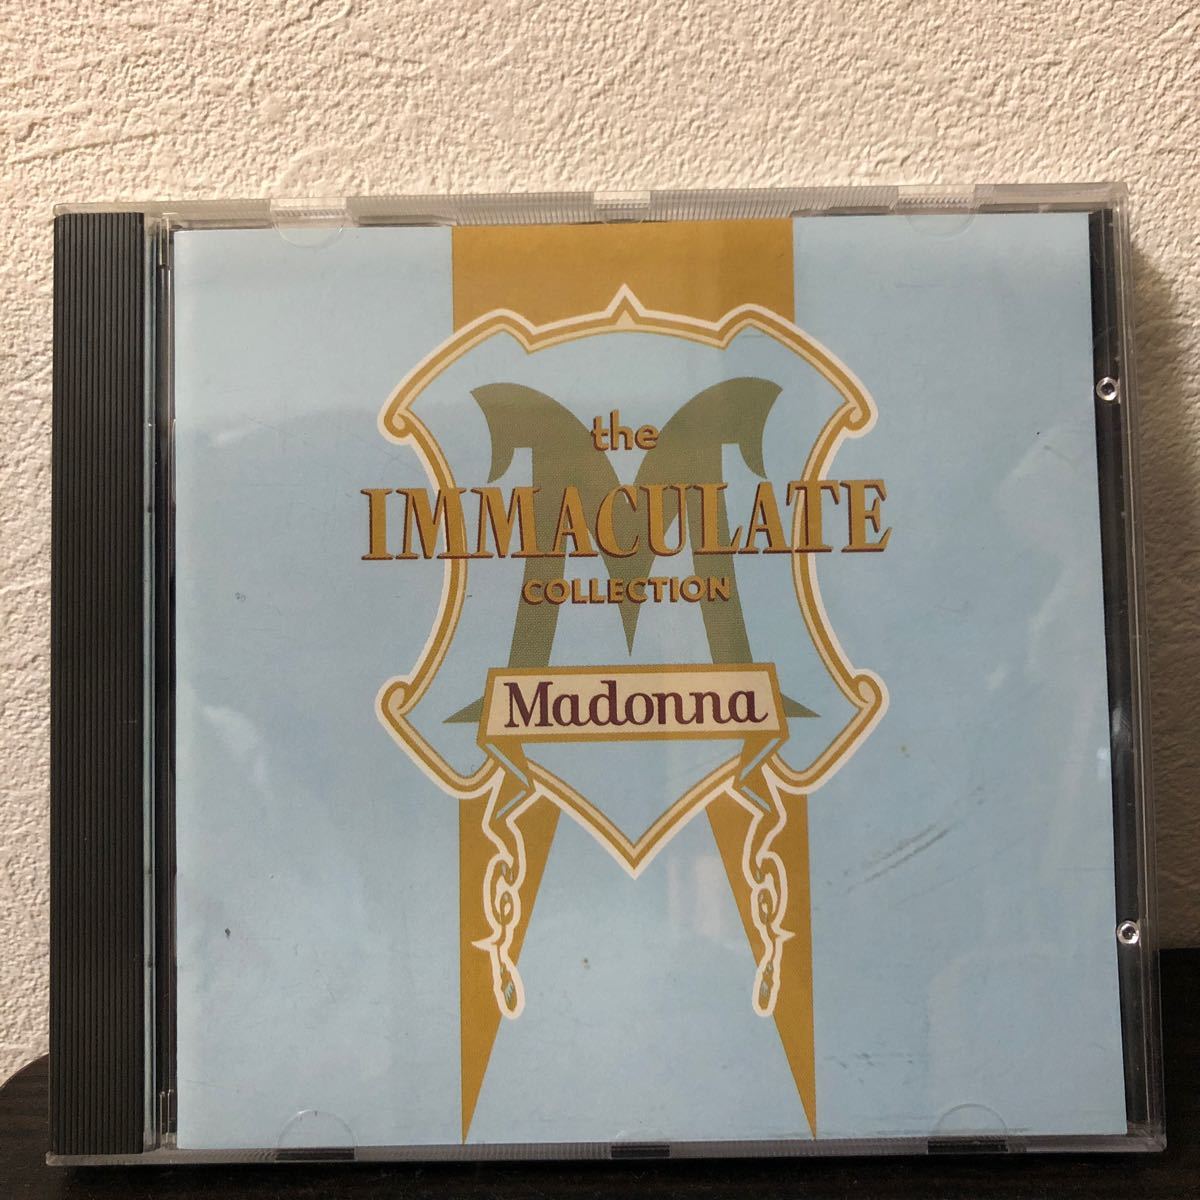 The Immaculate Collection [Audio CD] MADONNA